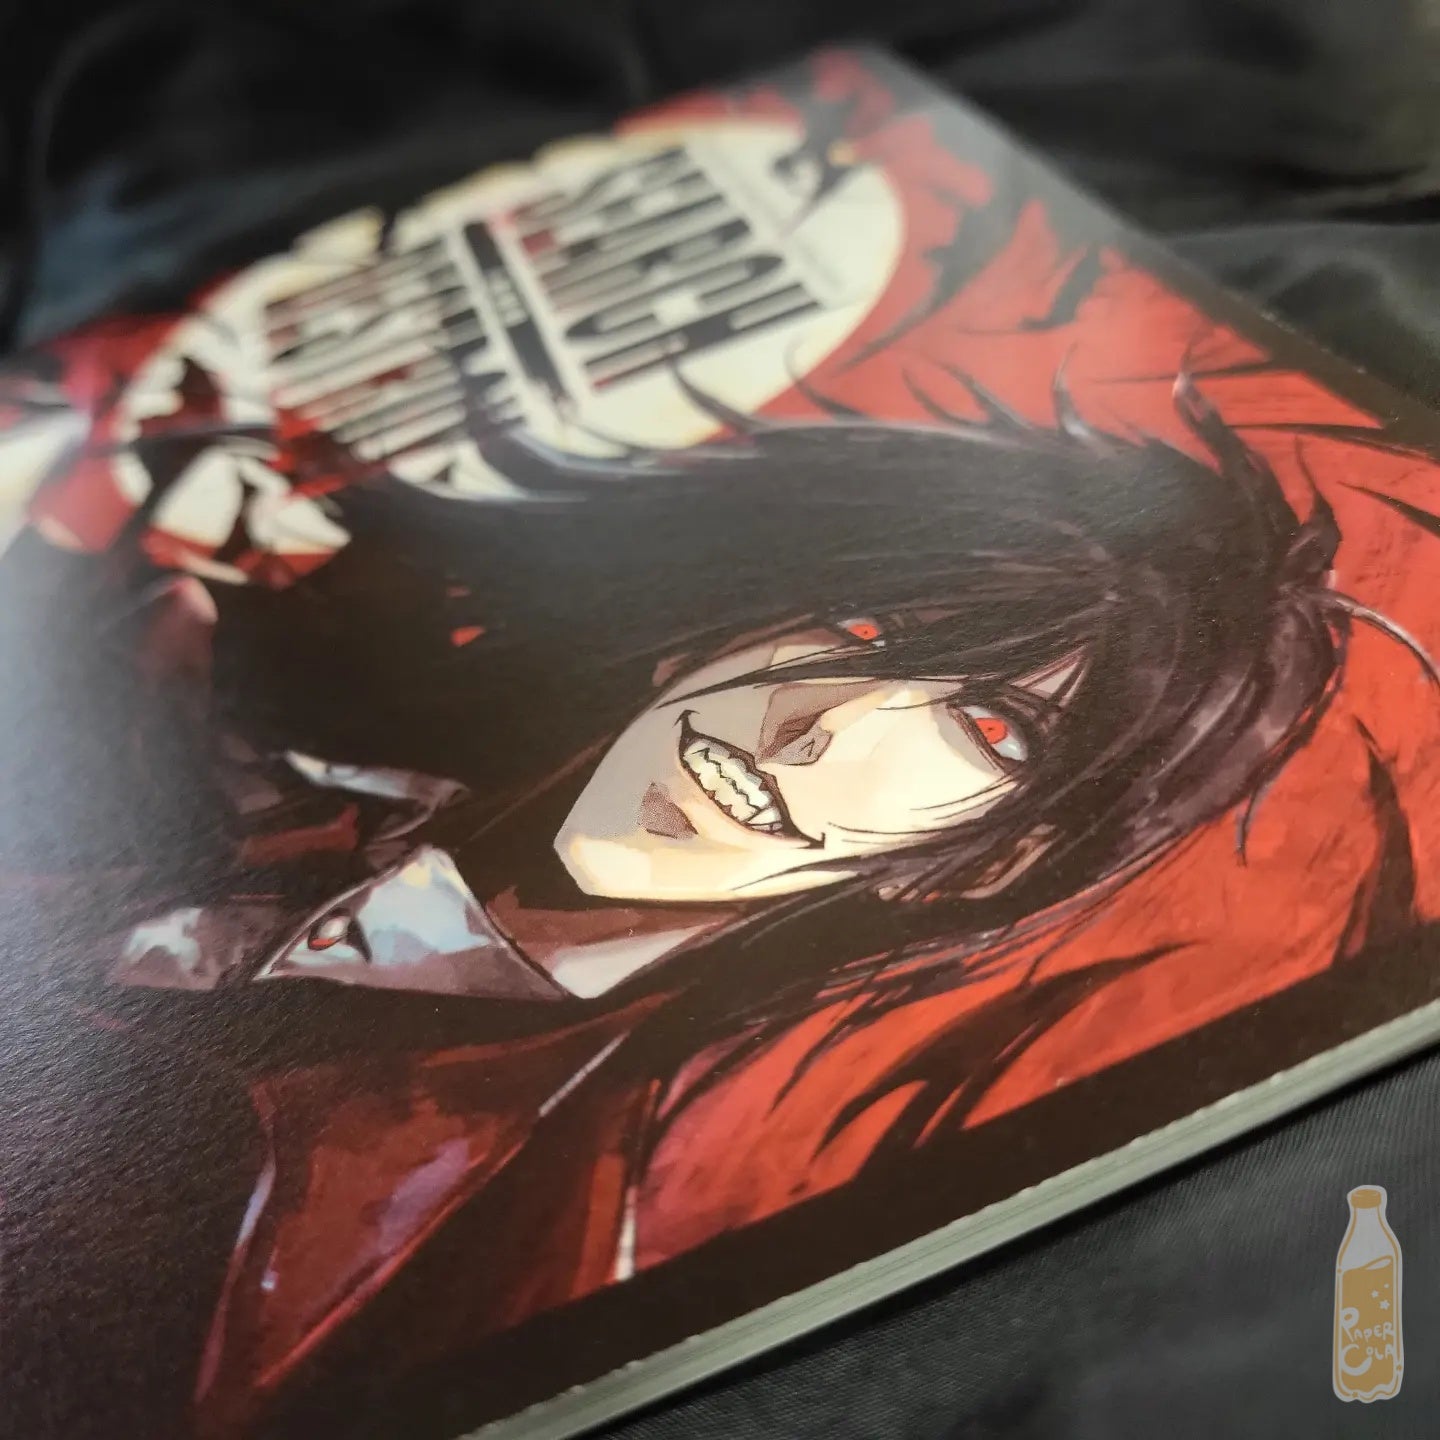 Hellsing Character Illustration: SEARCH AND DESTROY